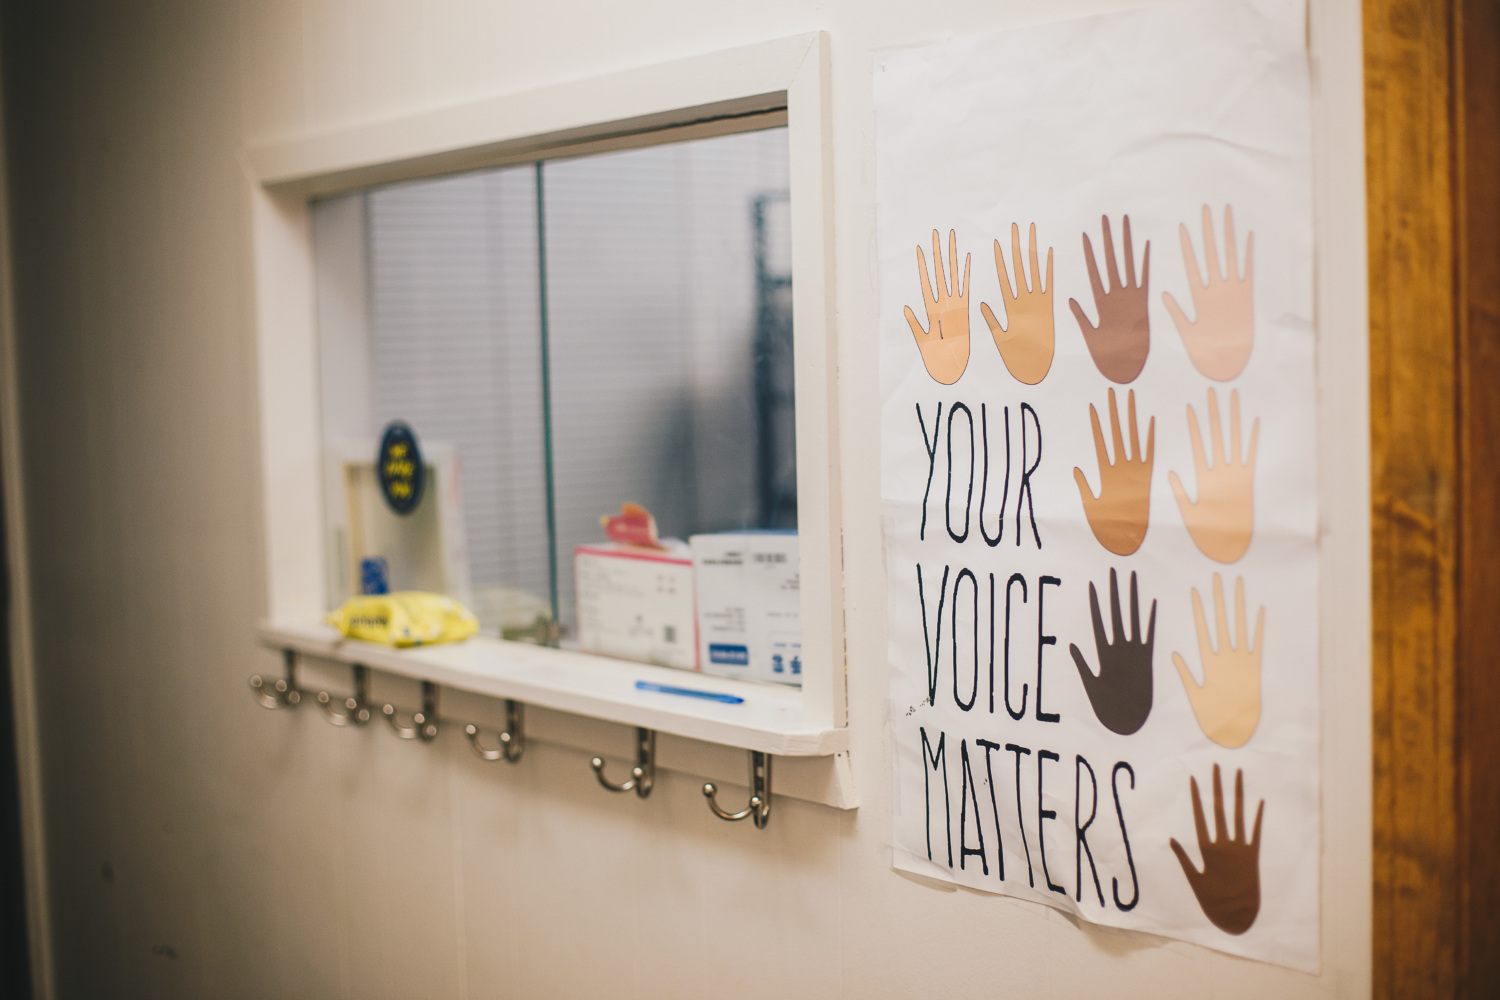 sign that says "Your voice matters"